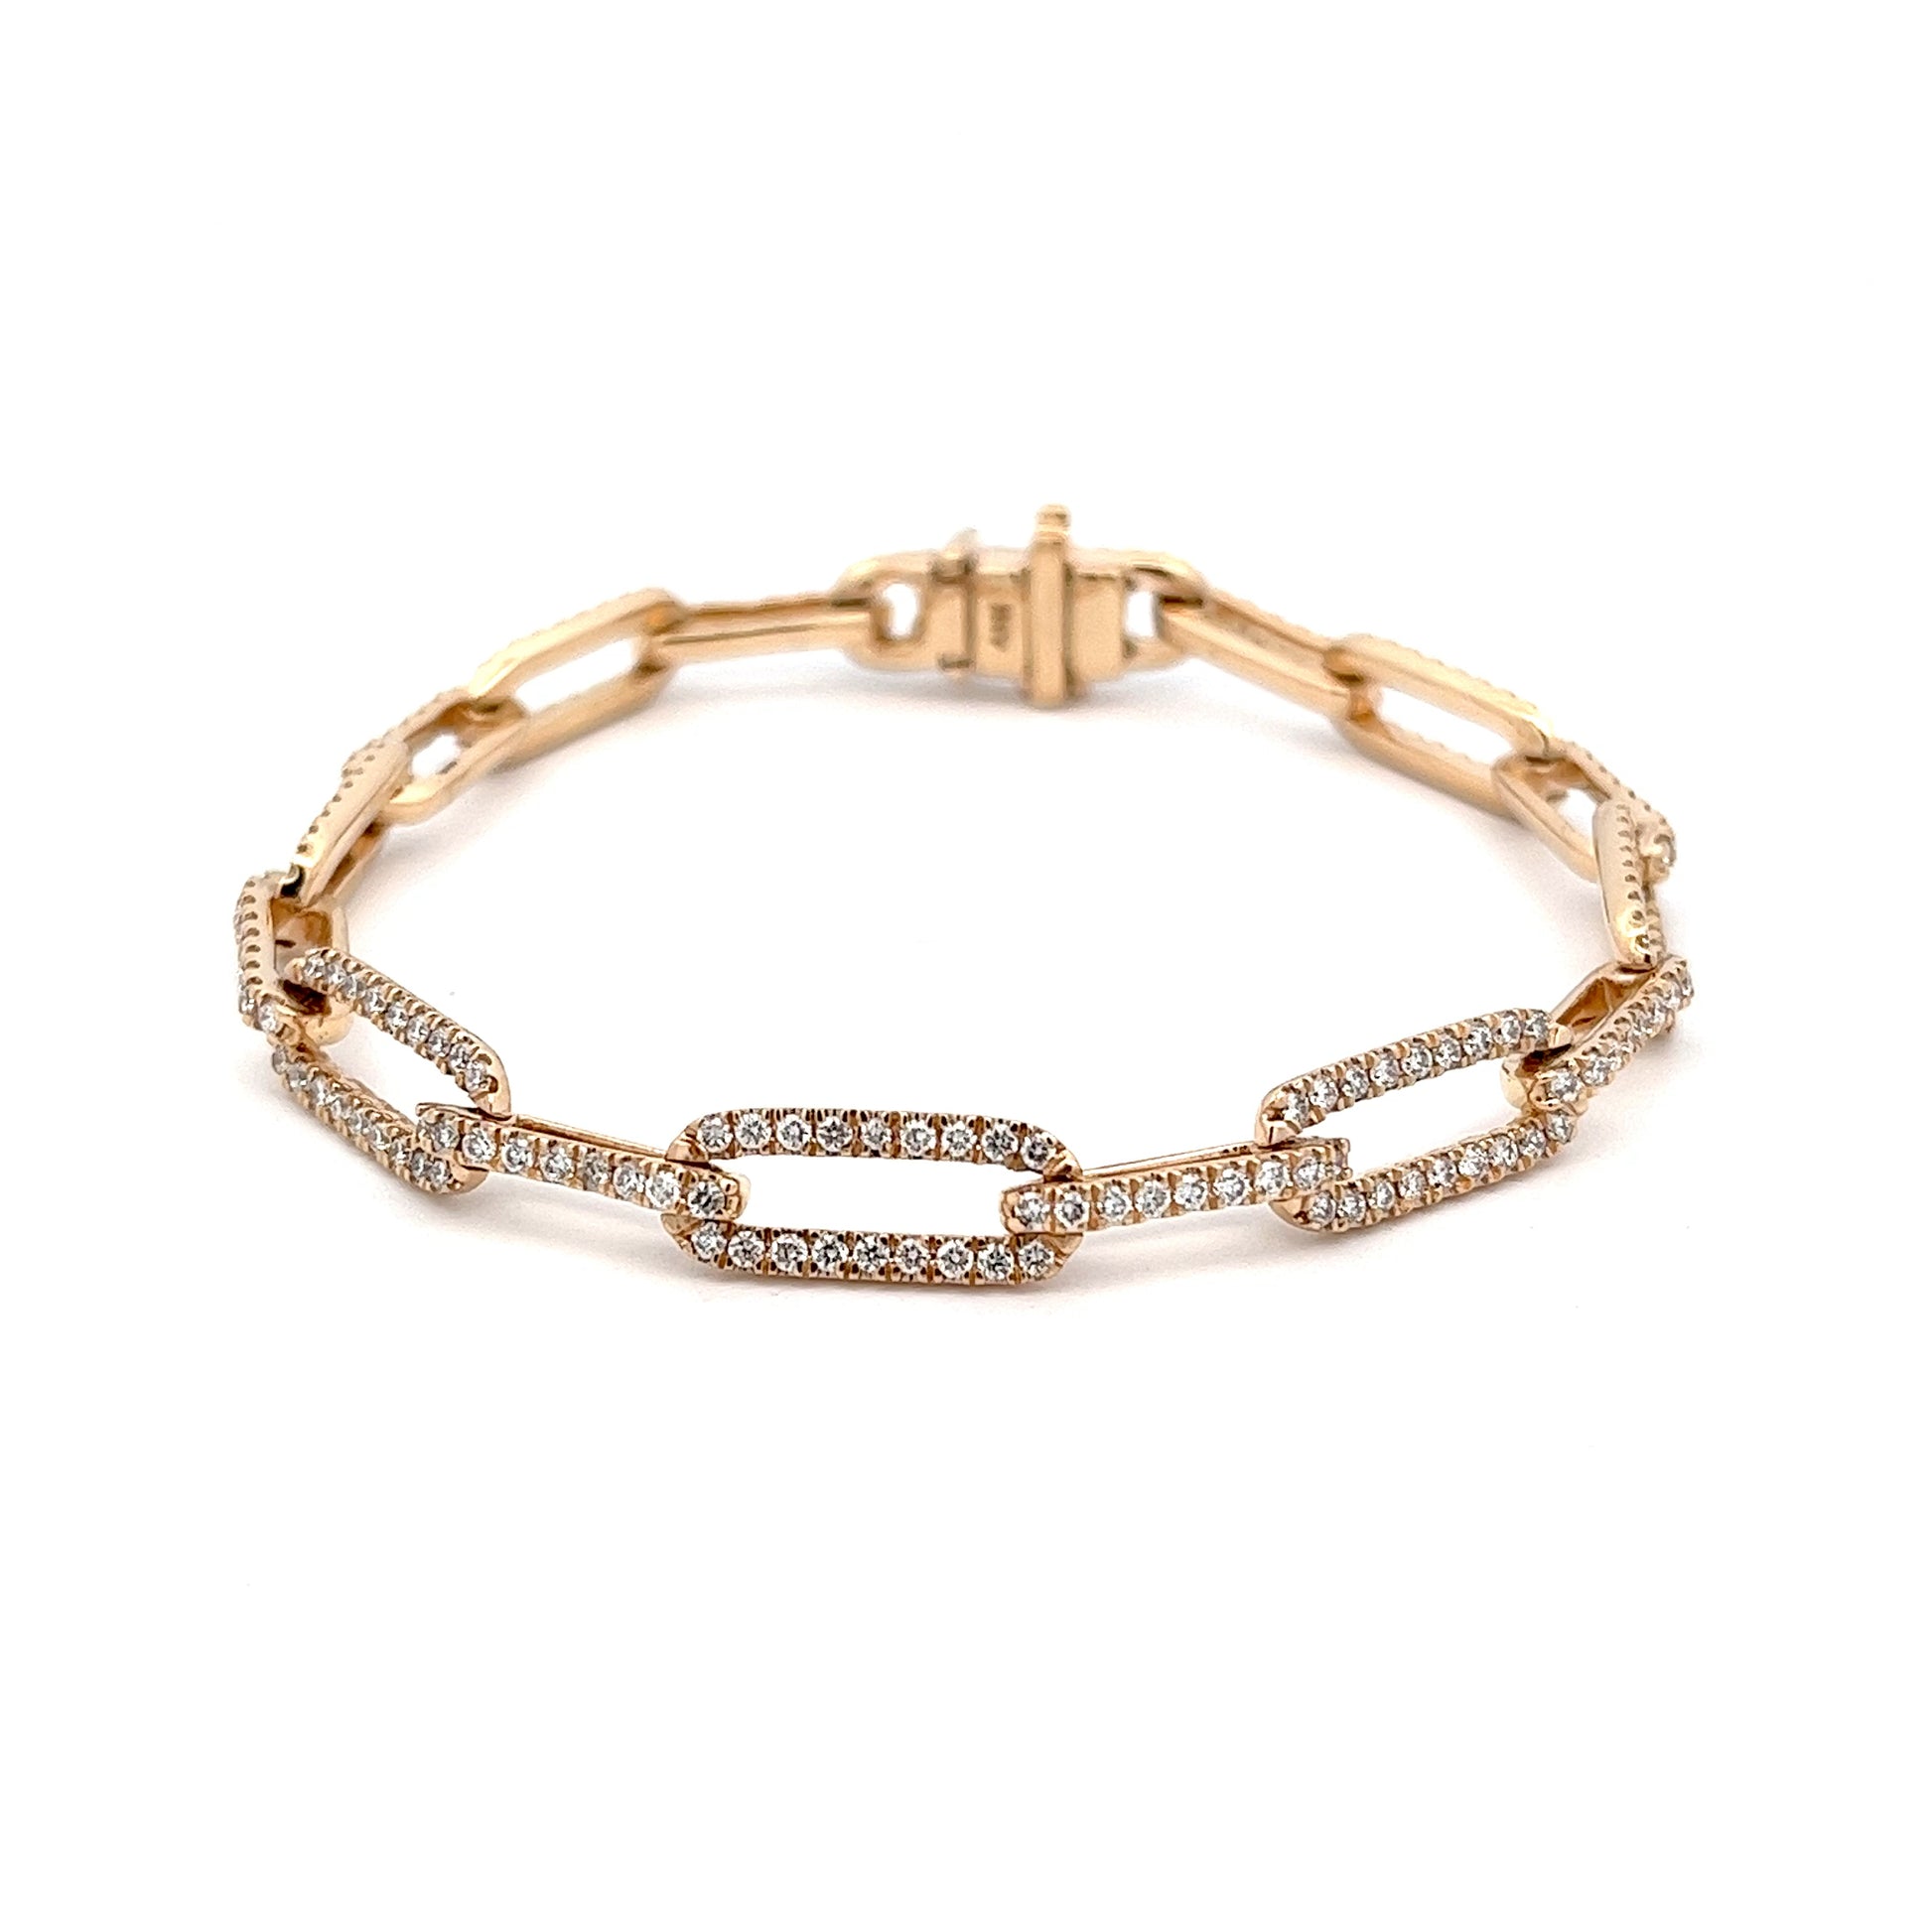 2.01ct Total Weight Diamond and Yellow Gold "Paperclip" Bracelet